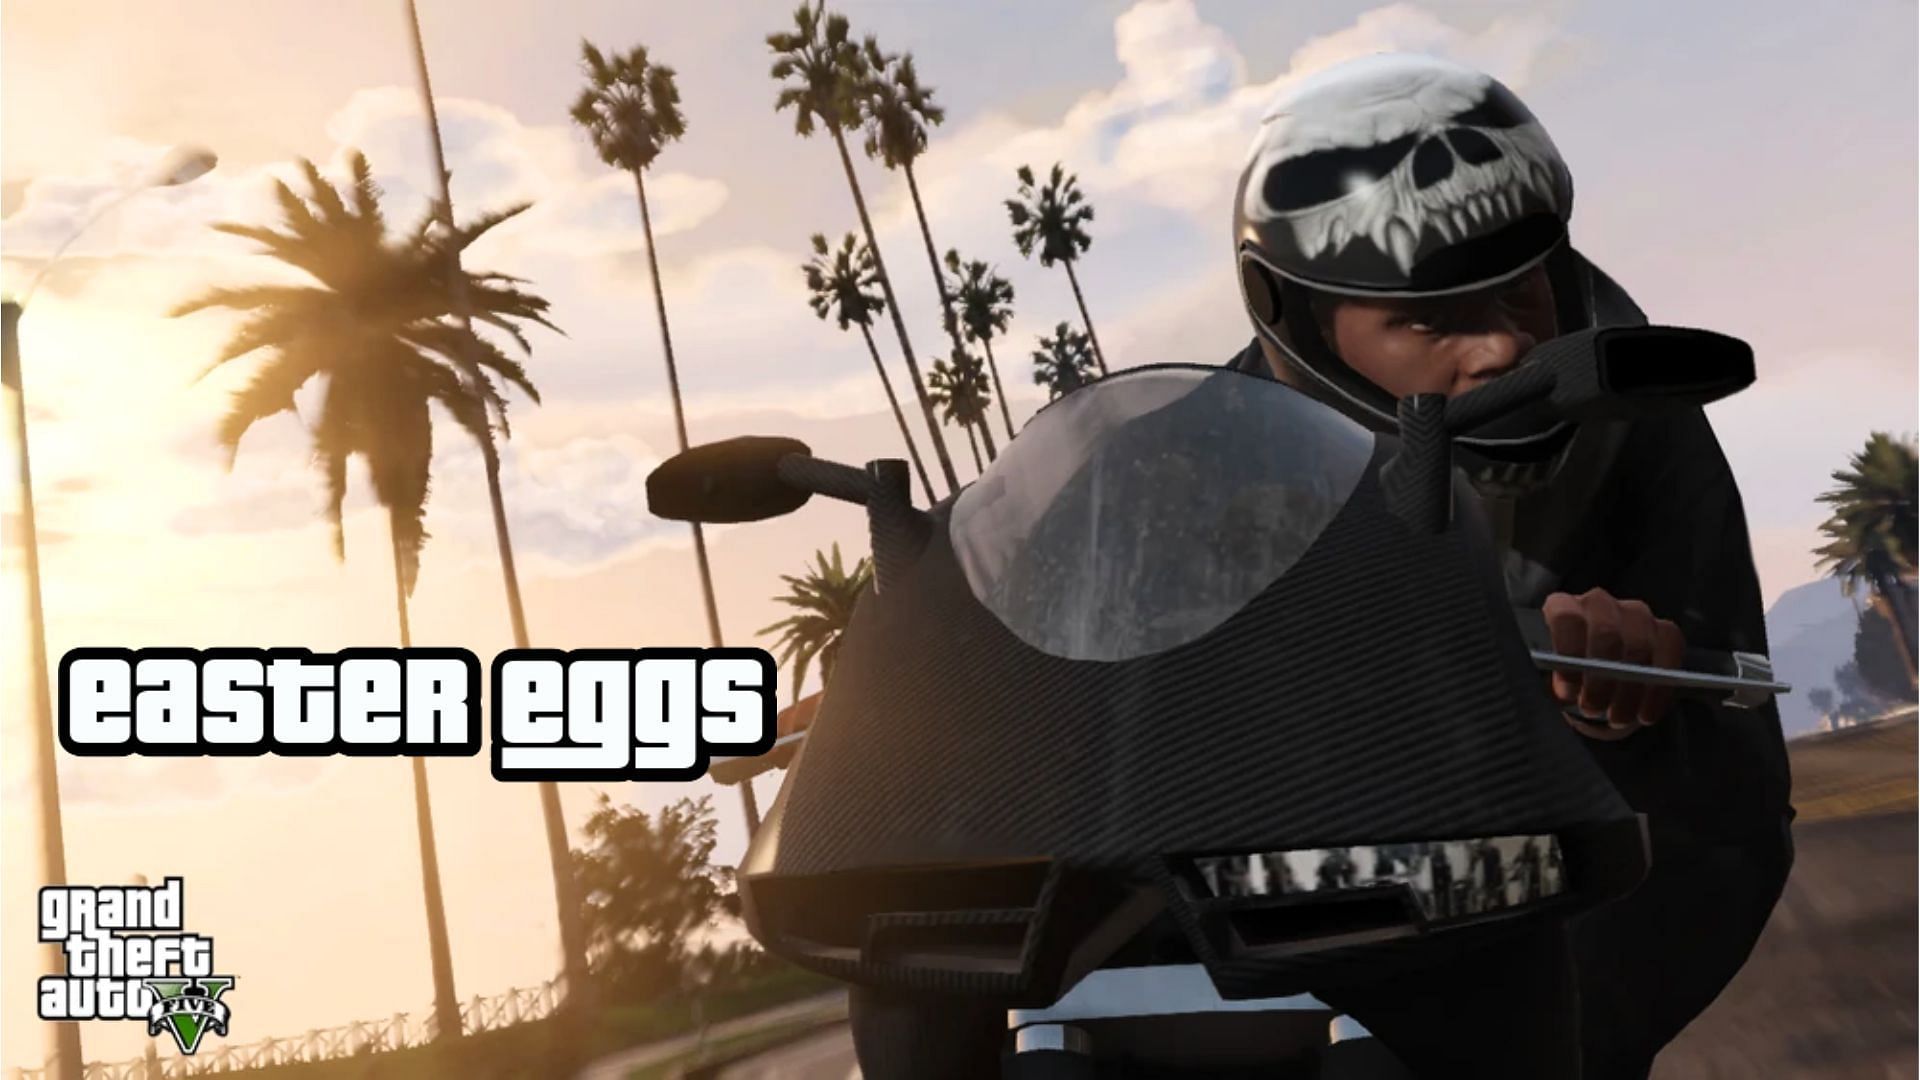 Five Easter eggs to look for in GTA 5 Story Mode (Image via Rockstar Games)